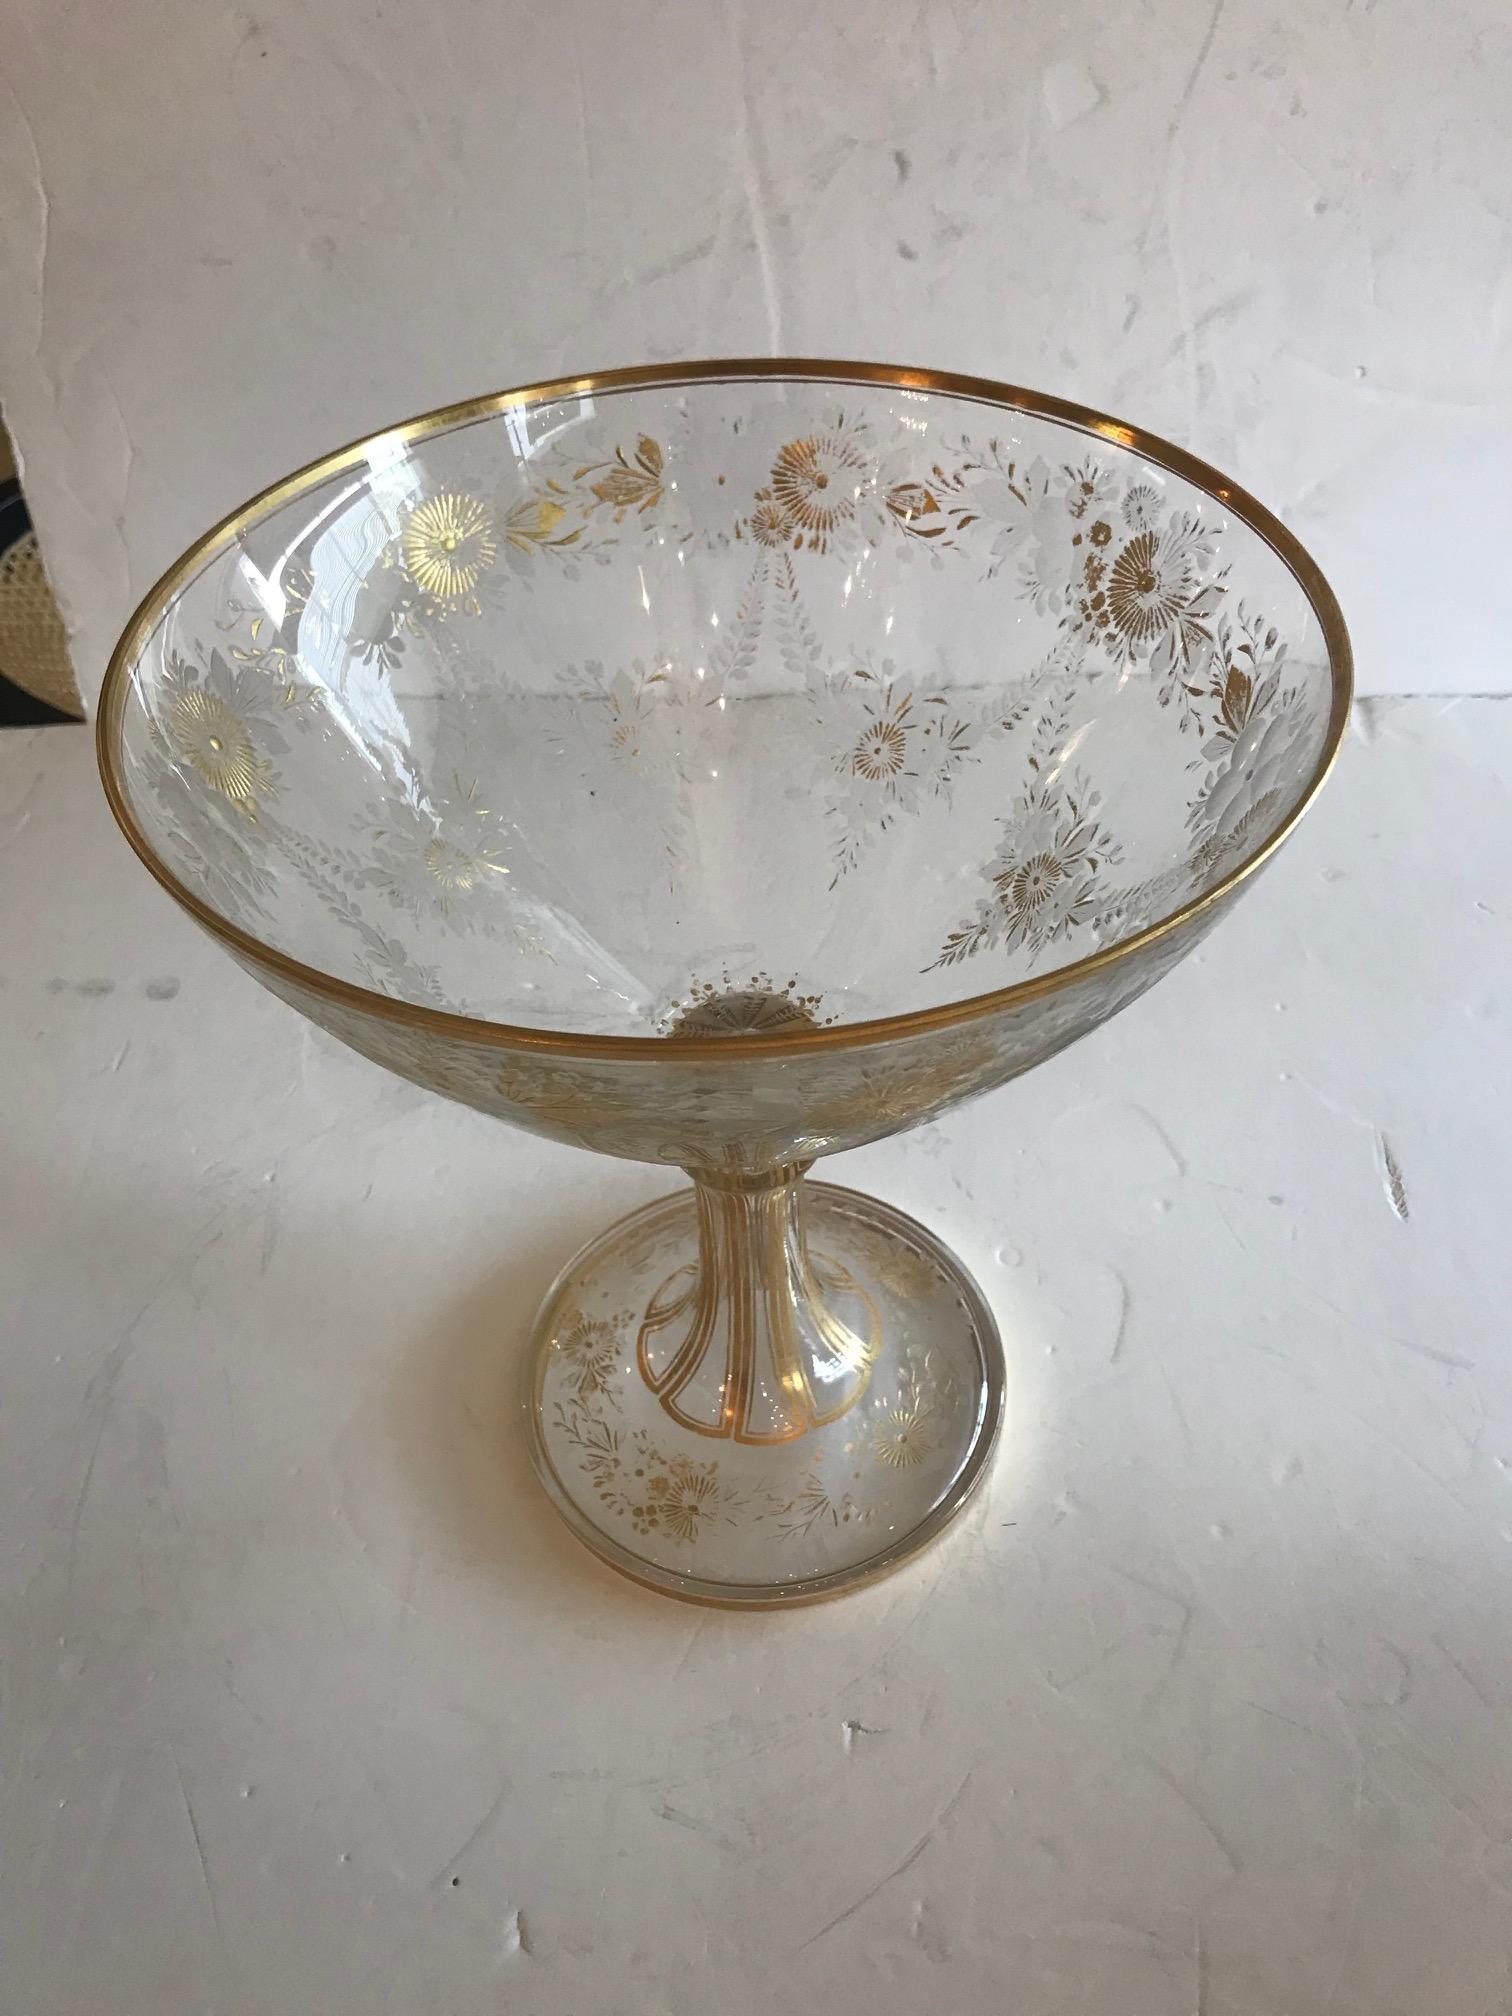 19th Century Antique French Baccarat Etched Glass Centerpiece Vessel